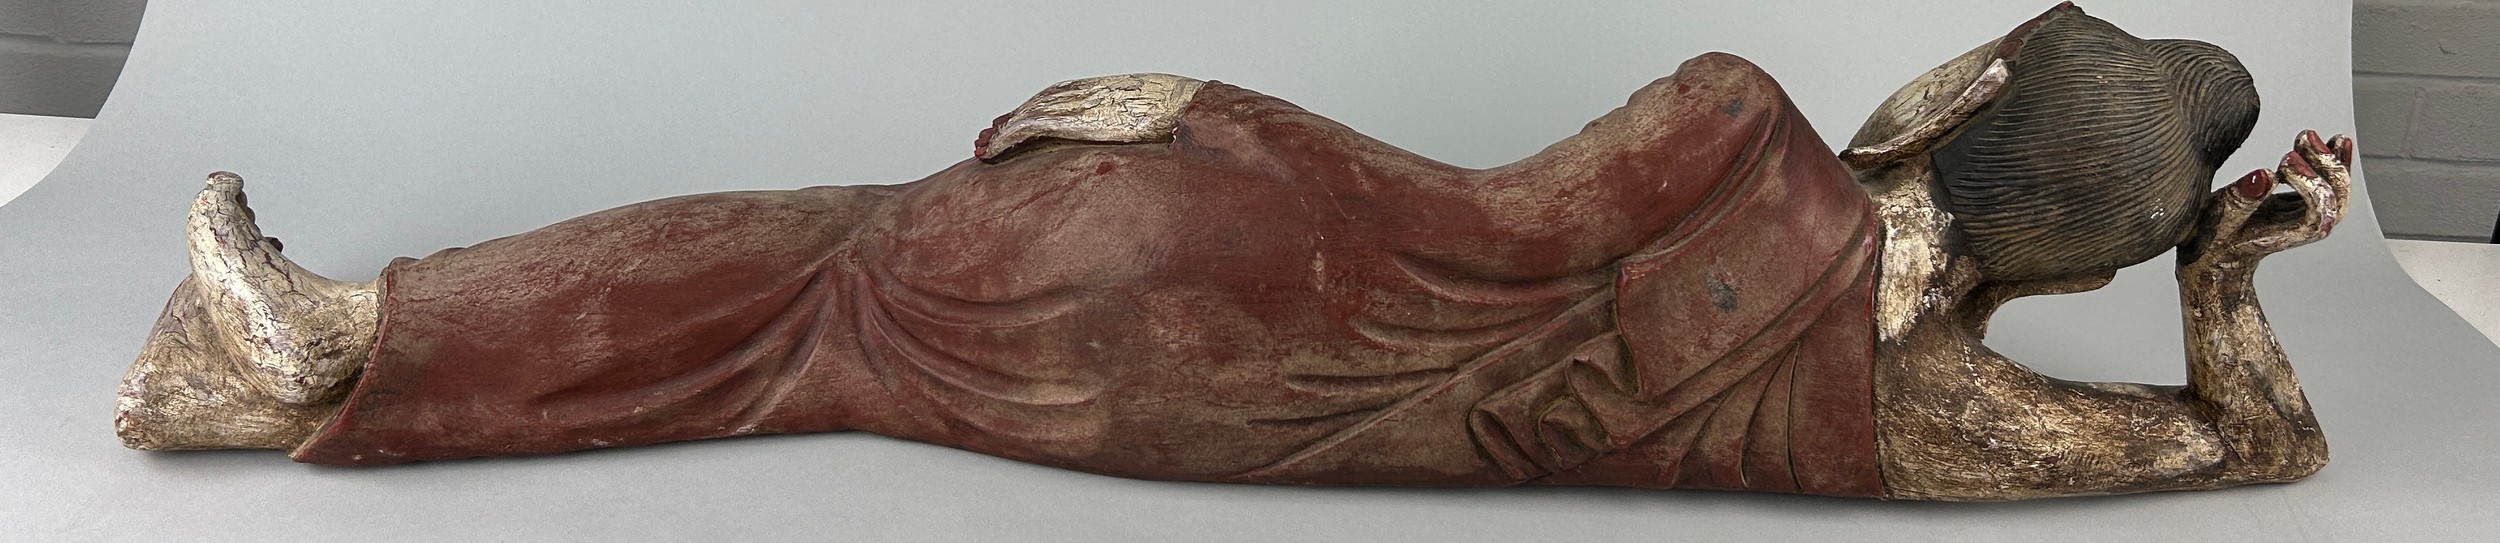 A THAI CARVED WOODEN SCULPTURE OF THE RECLINING BUDDHA, 20th Century 105cm x 23cm - Image 5 of 6